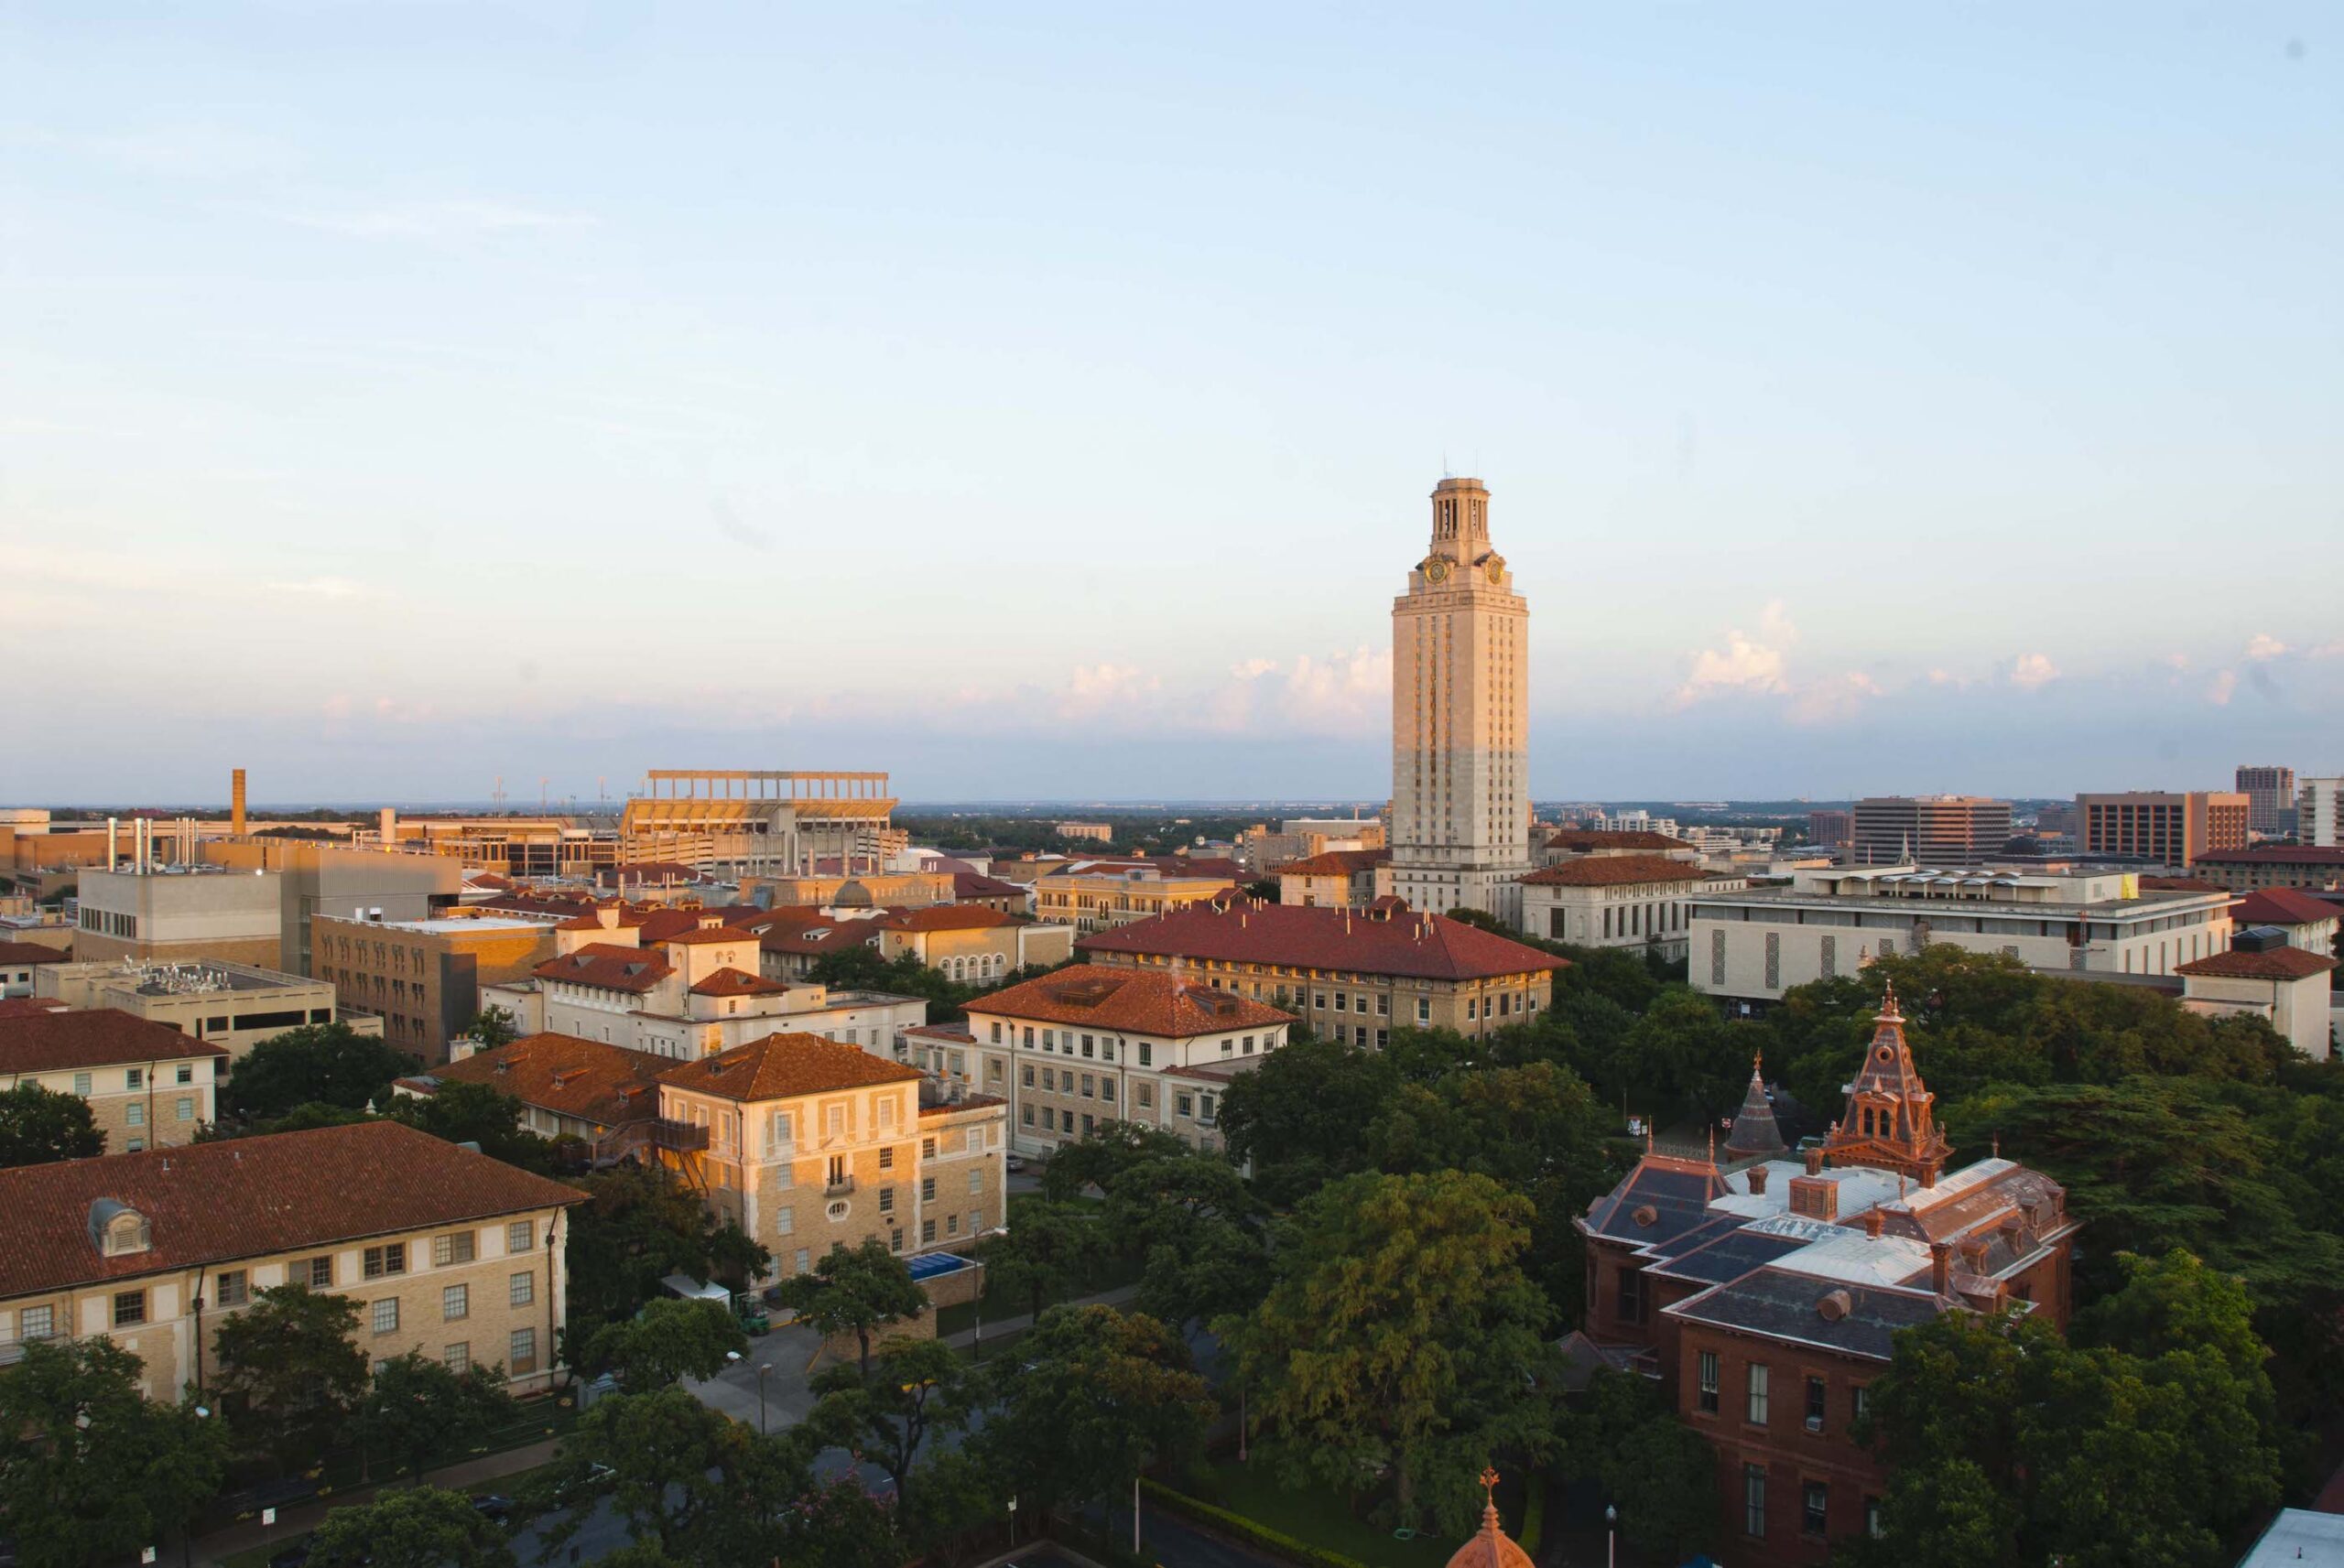 FourYear Graduation Rate Tops 70 as UT Austin Admits One of its